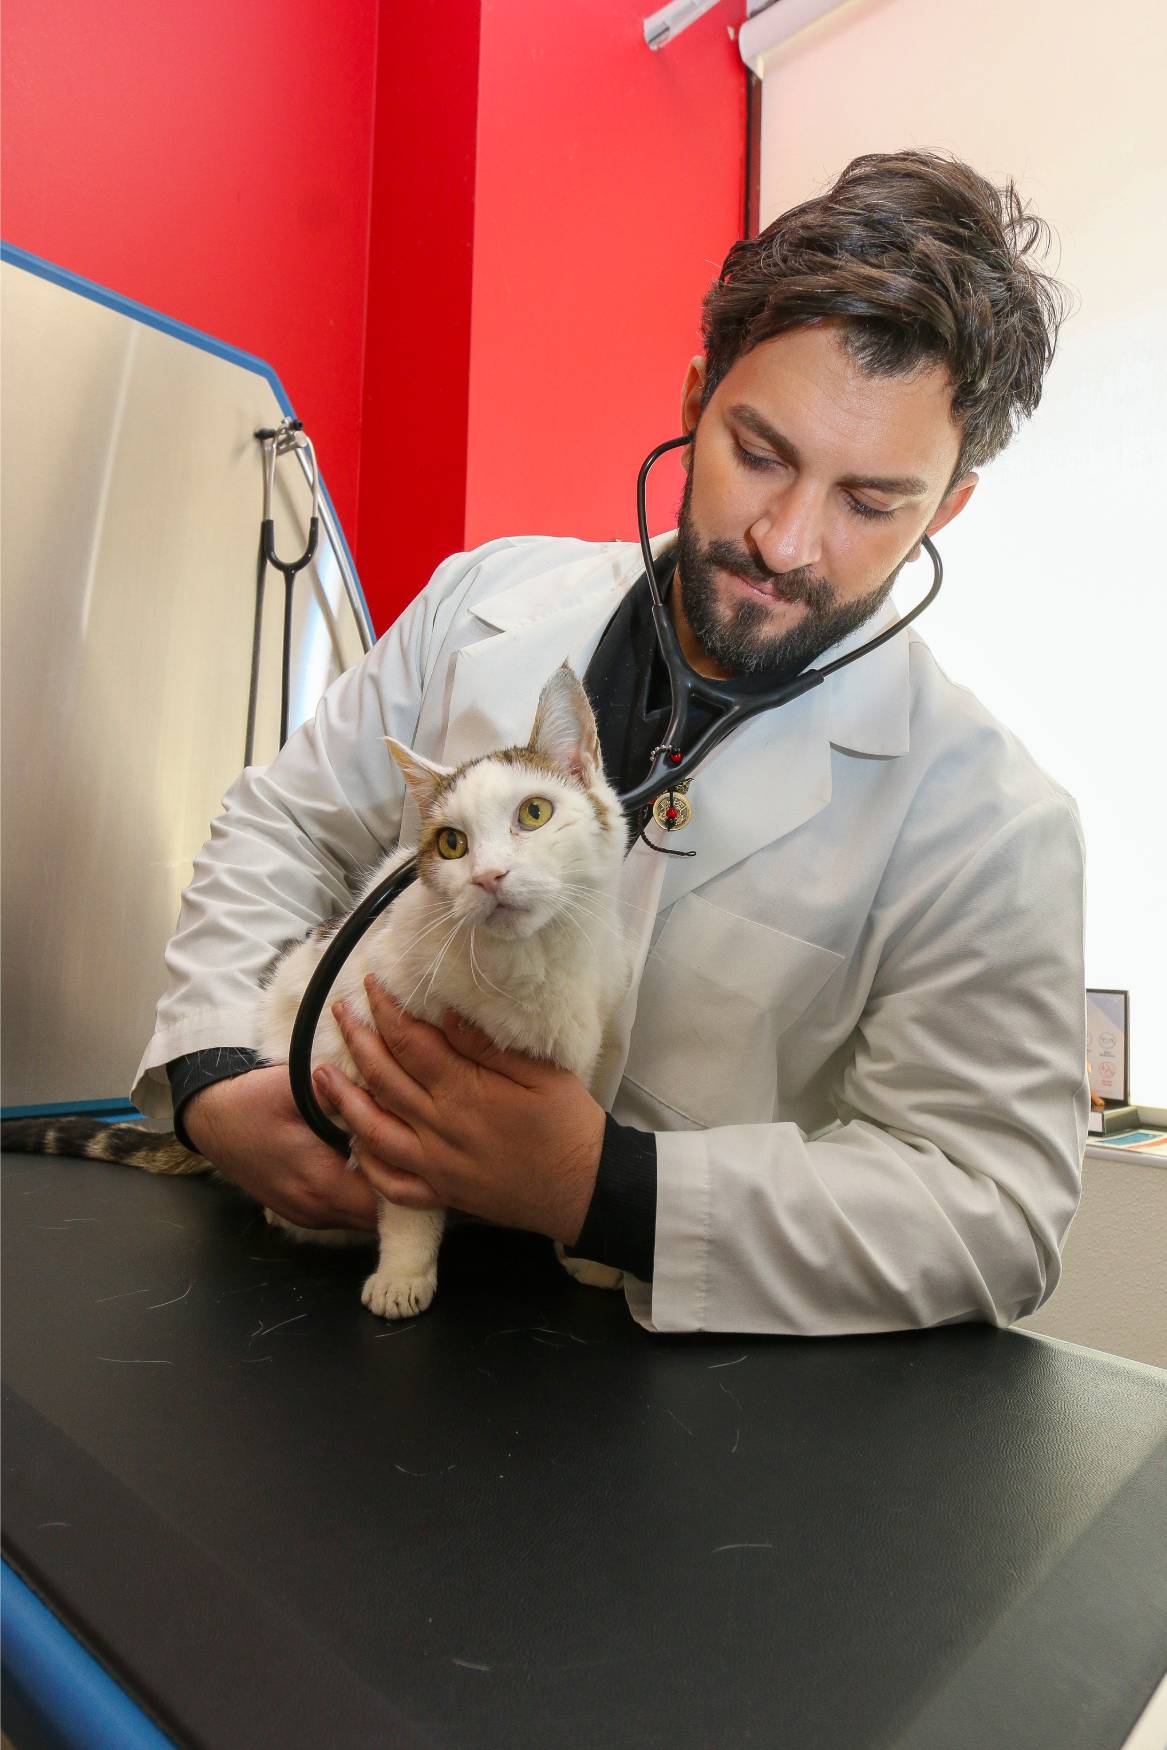 a person in a white coat holding a cat